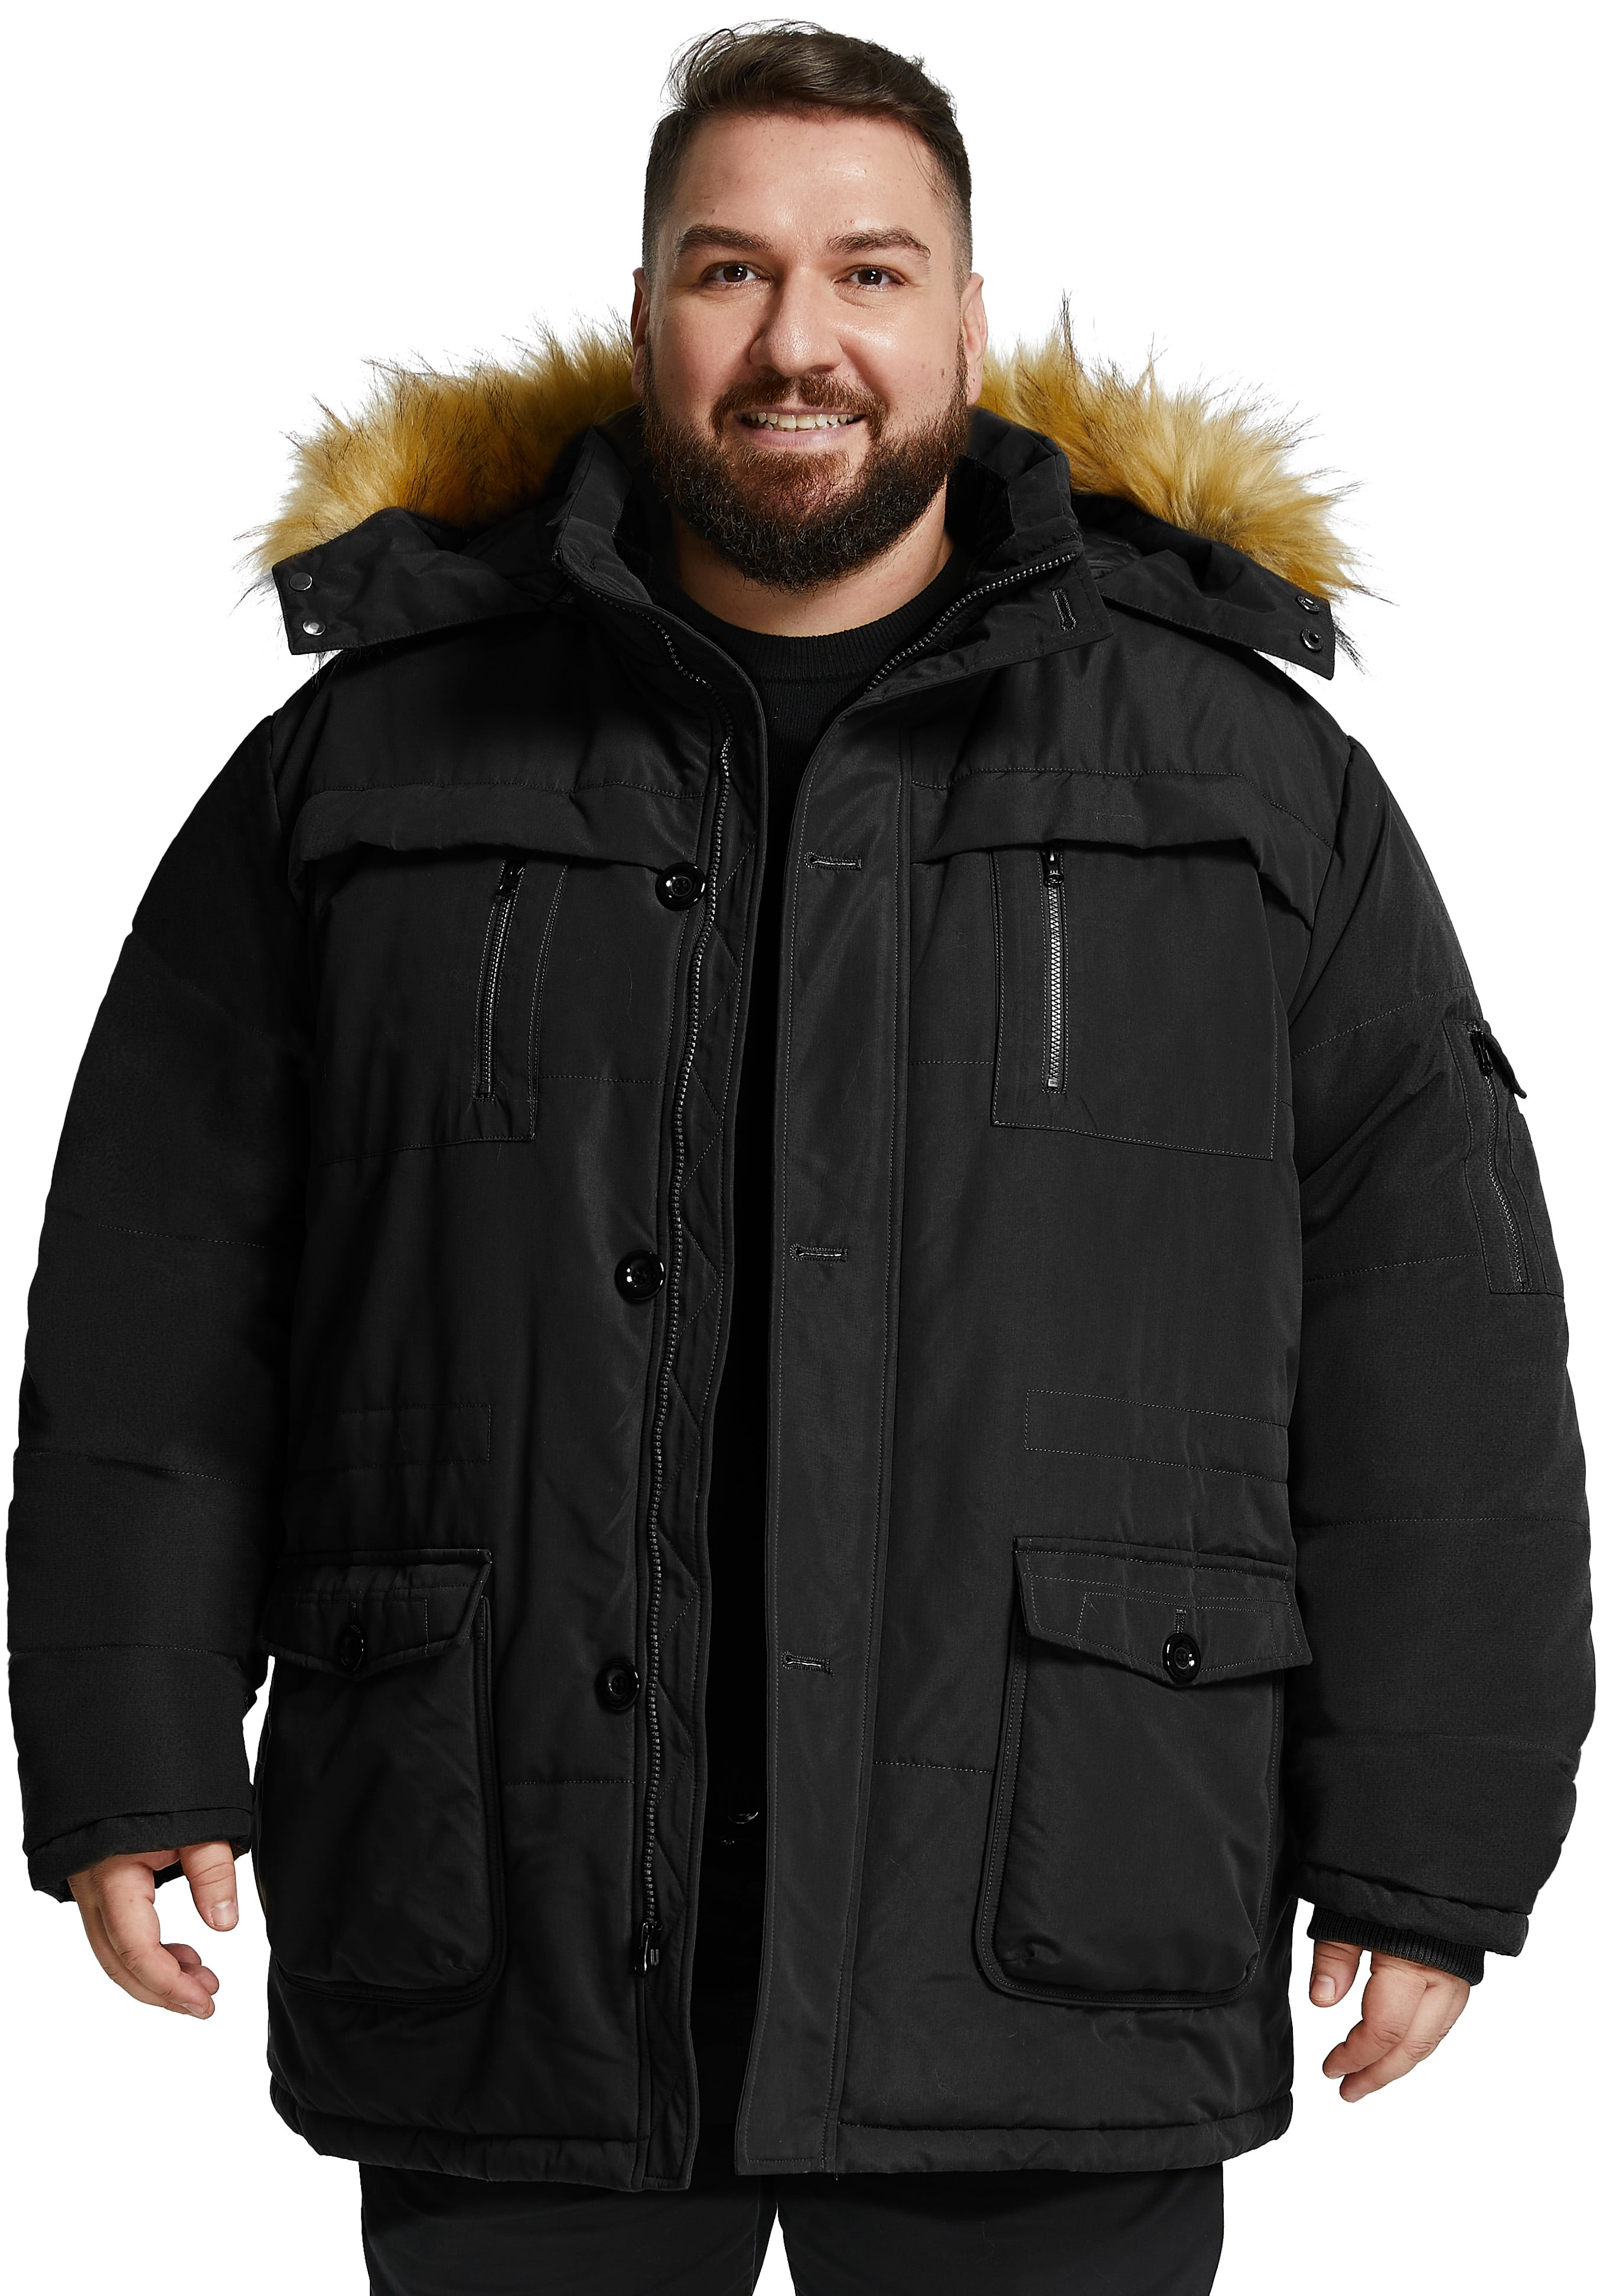 Soularge Men's Big and Tall Heavy Winter Warm Plaid Hooded Jacket